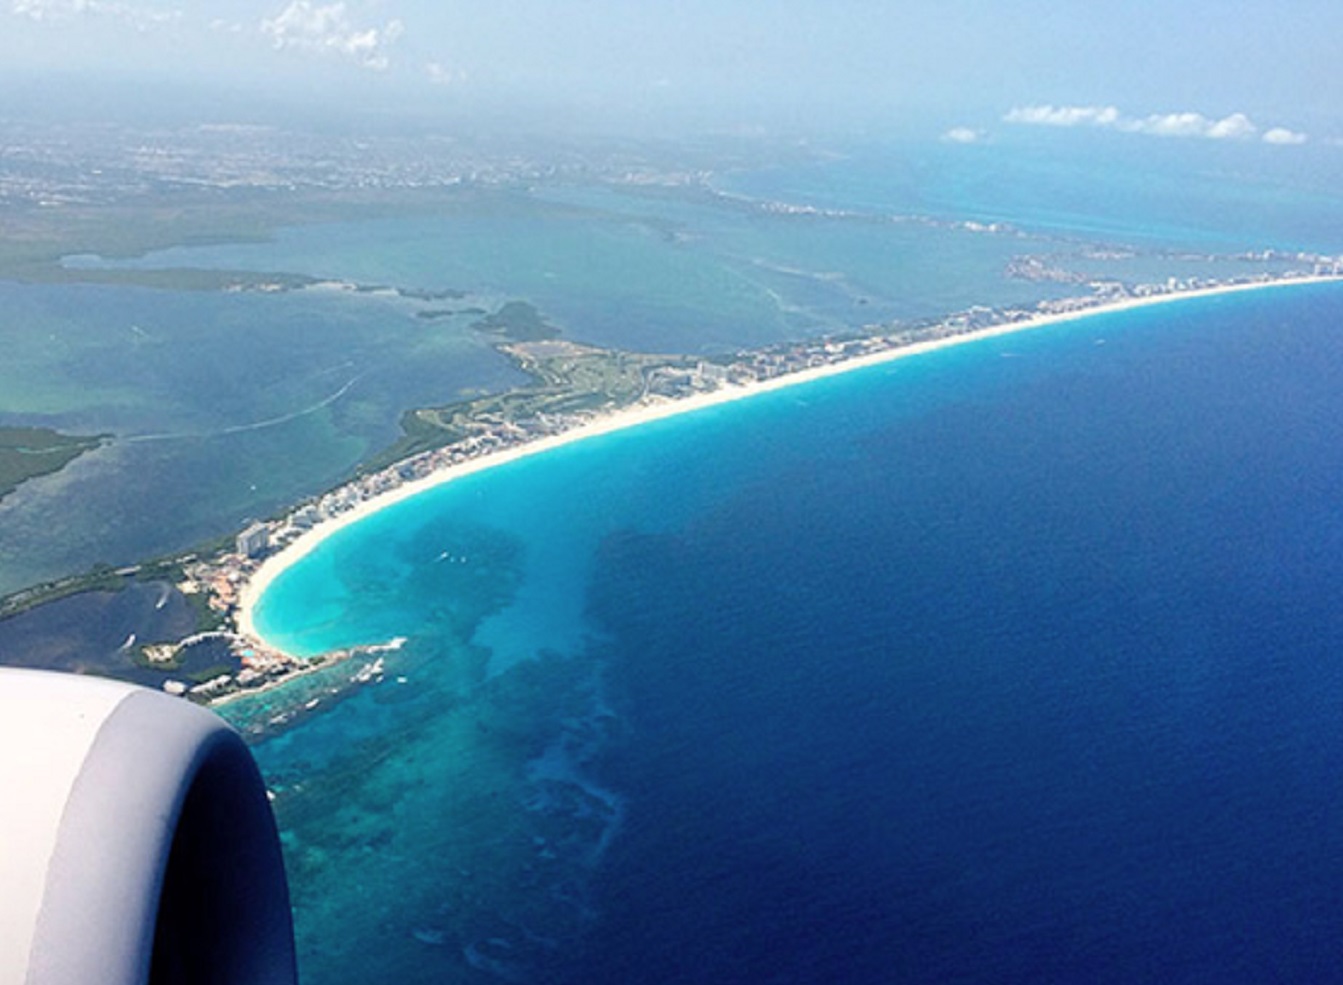 trips to cancun from dallas